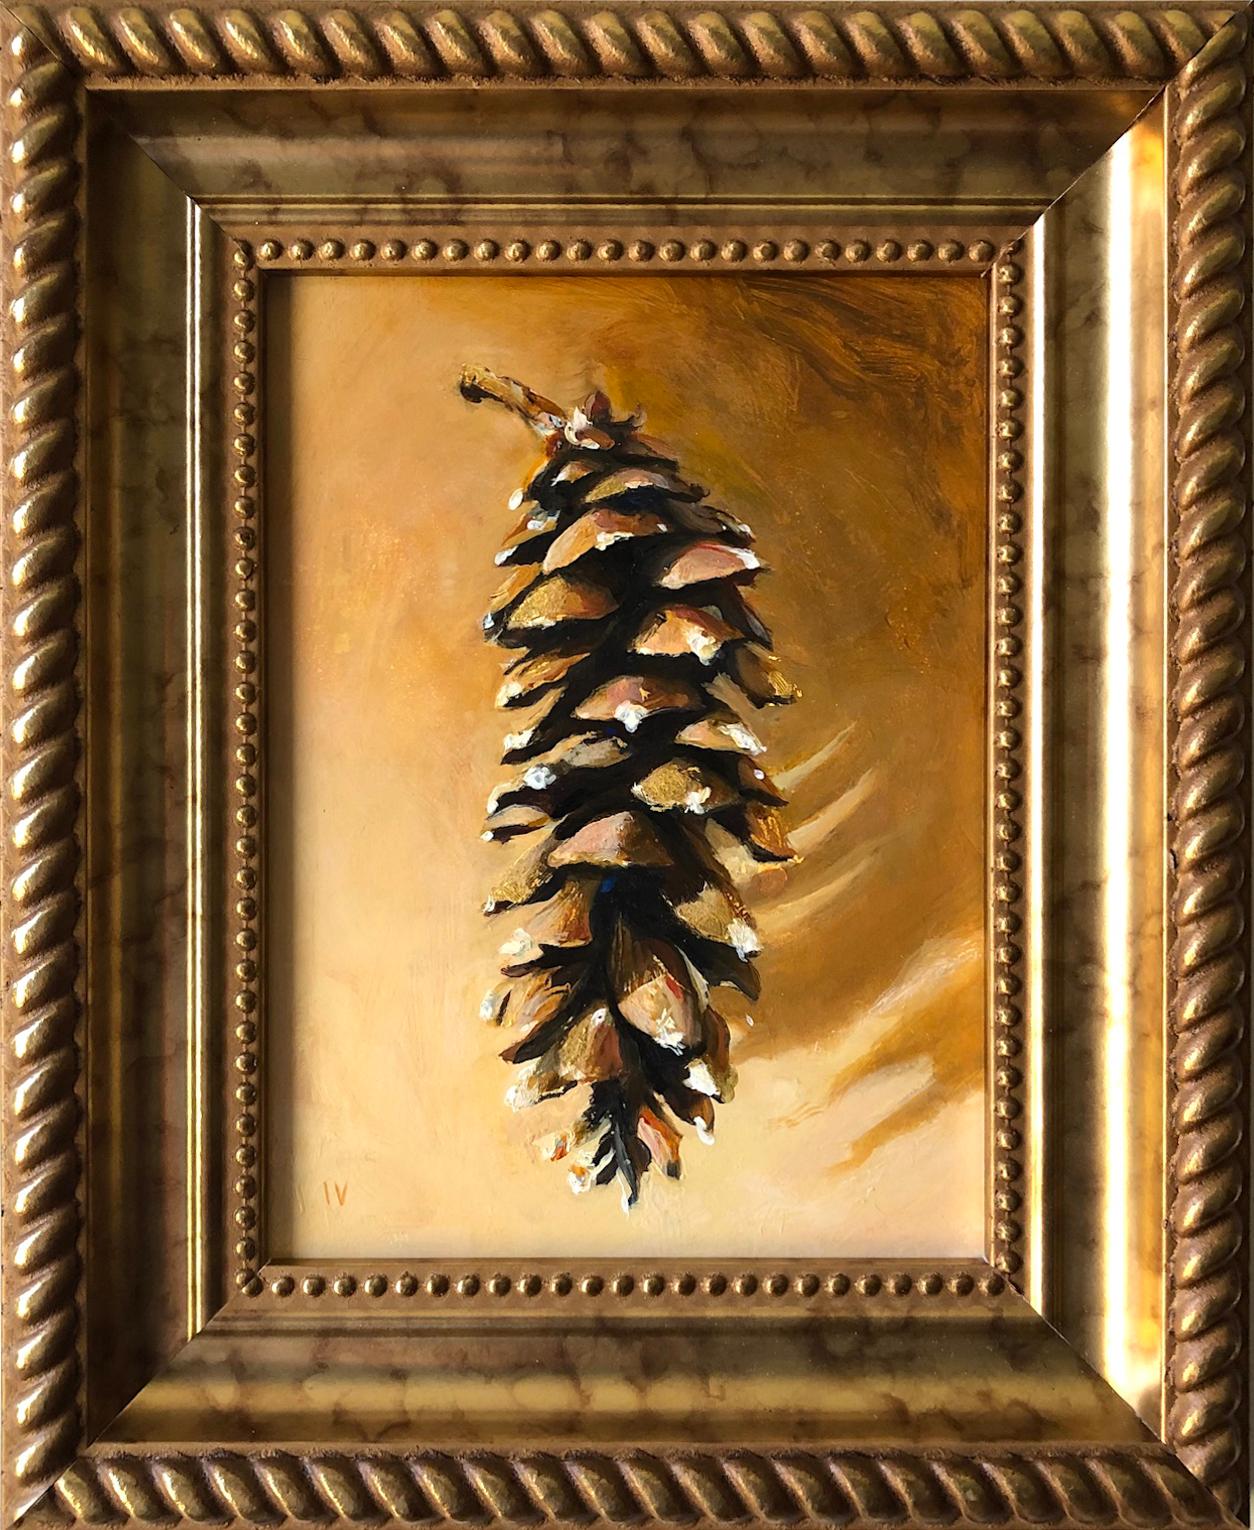 Realistic still life painting of a pine cone with gold leaf on a warm yellow background
"Pinecone #5" By Matthew Hopkins, 2021
Oil on panel
6 x 8 inches unframed
9.5 x 11.5 inches in traditional gold frame

Matthew Hopkins corrals commonplace,